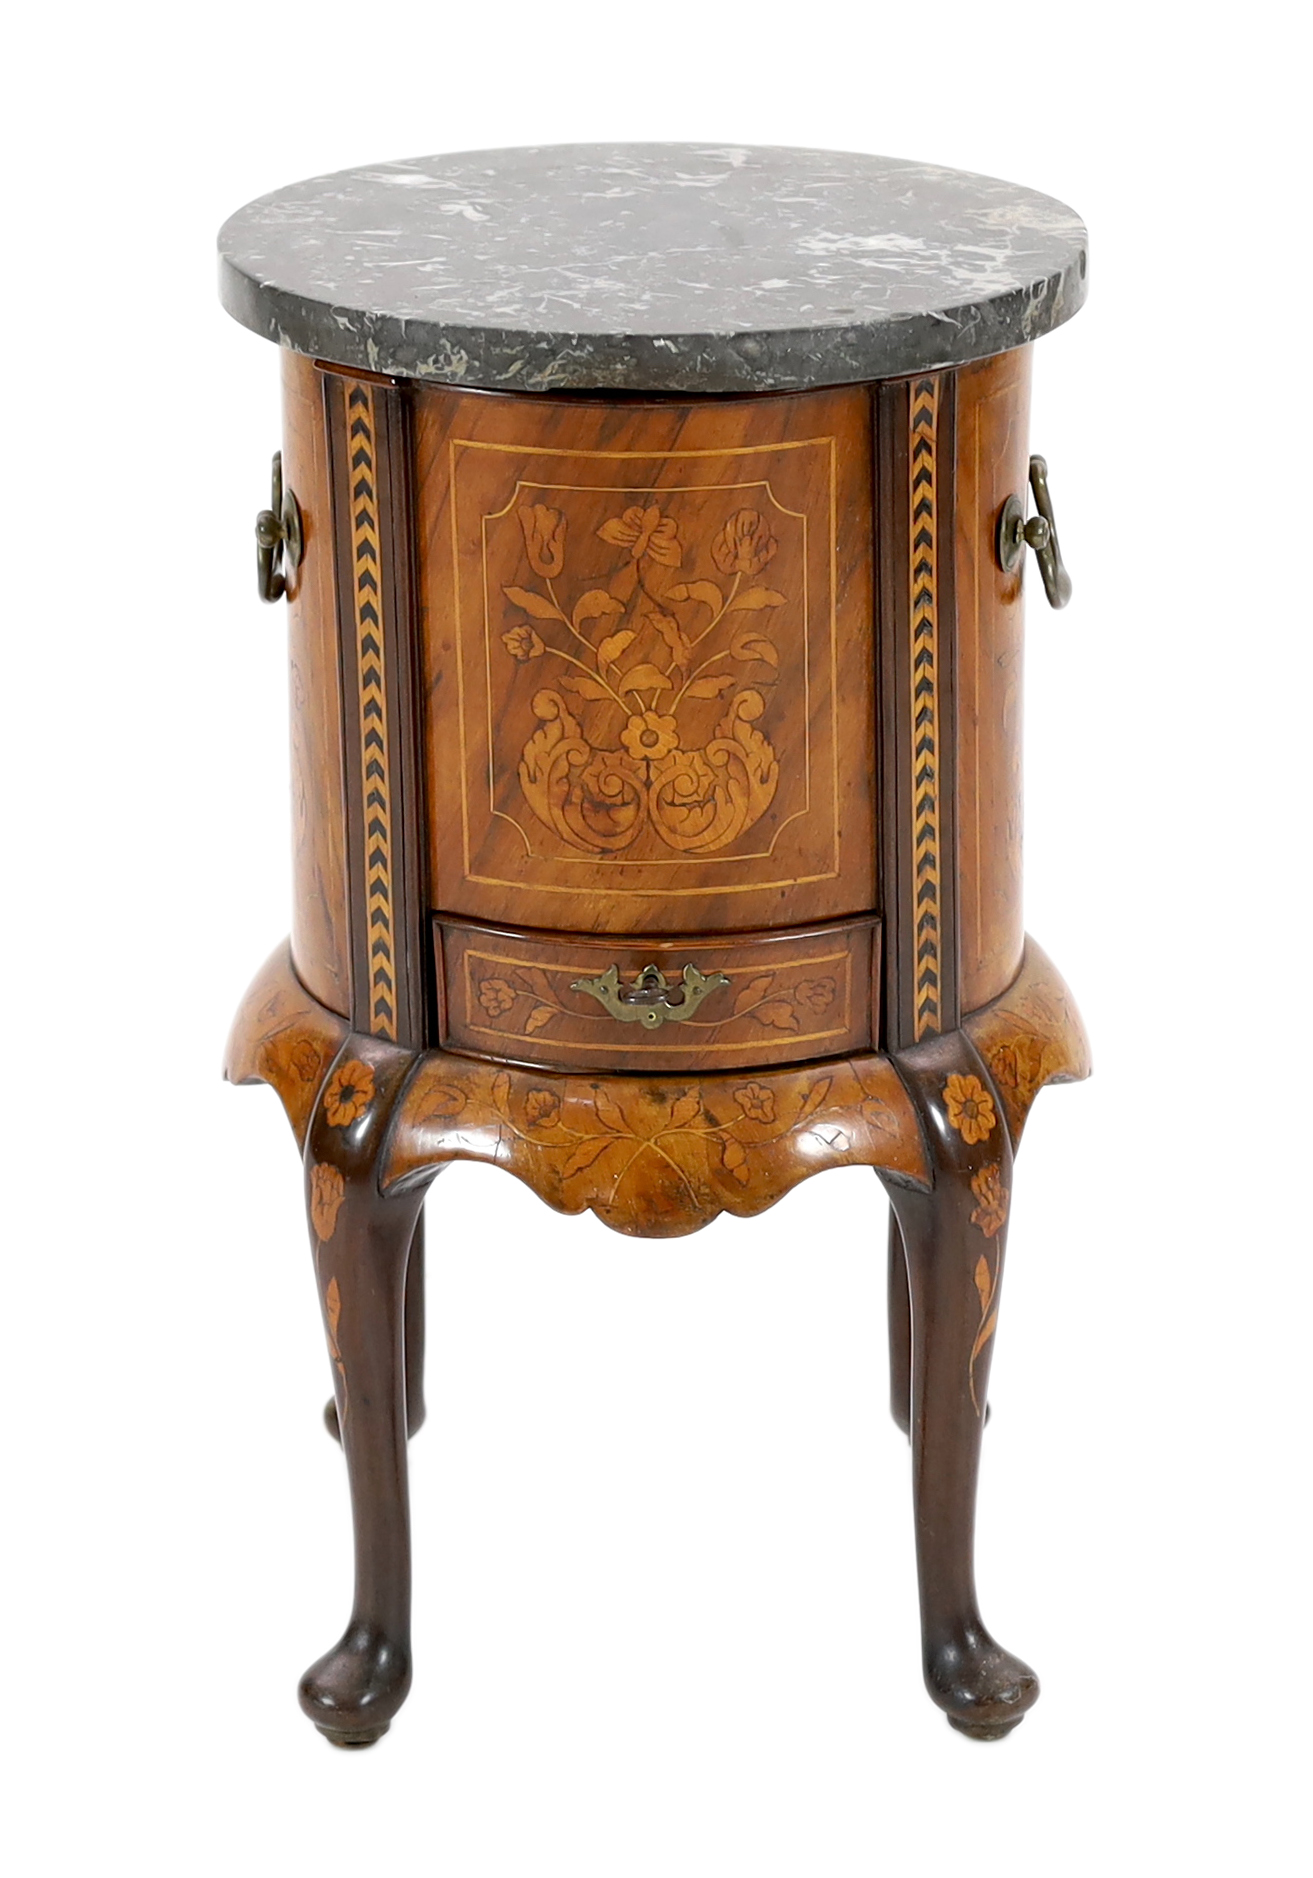 A late 18th century Dutch floral marquetry inlaid walnut wine cooler, 32cm diameter, 55cm high, Please note this lot attracts an additional import tax of 5% on the hammer price                                            